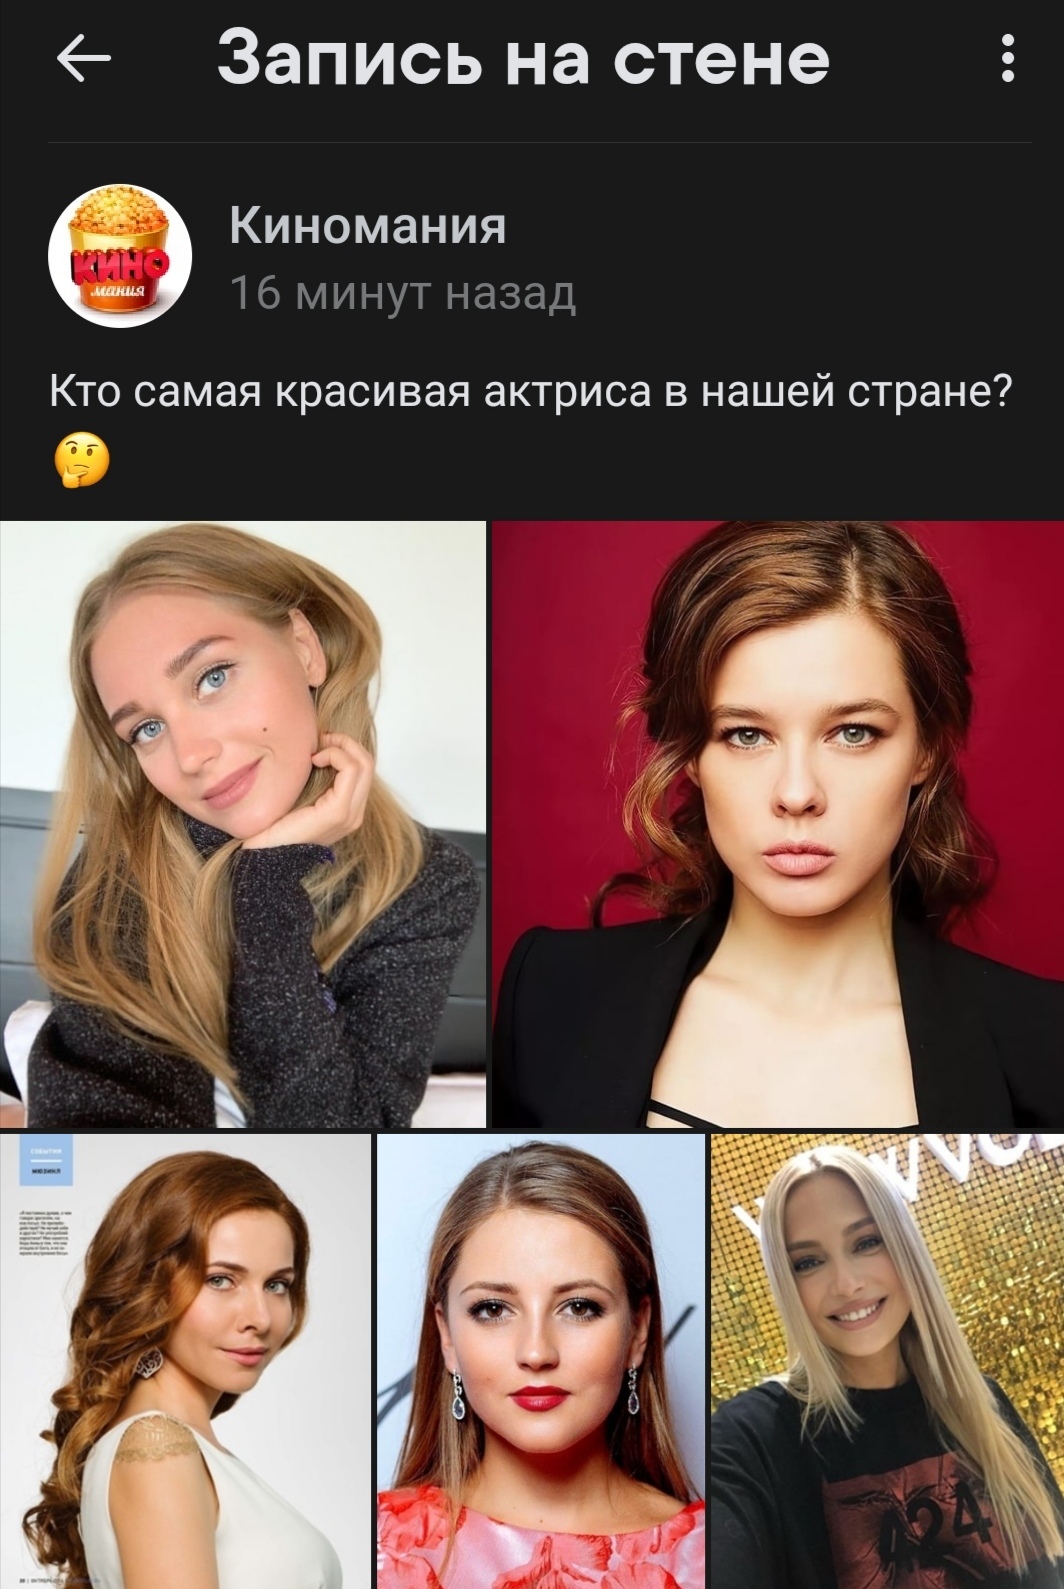 The most beautiful actress - beauty, Actors and actresses, Comments, Russian cinema, In contact with, Screenshot